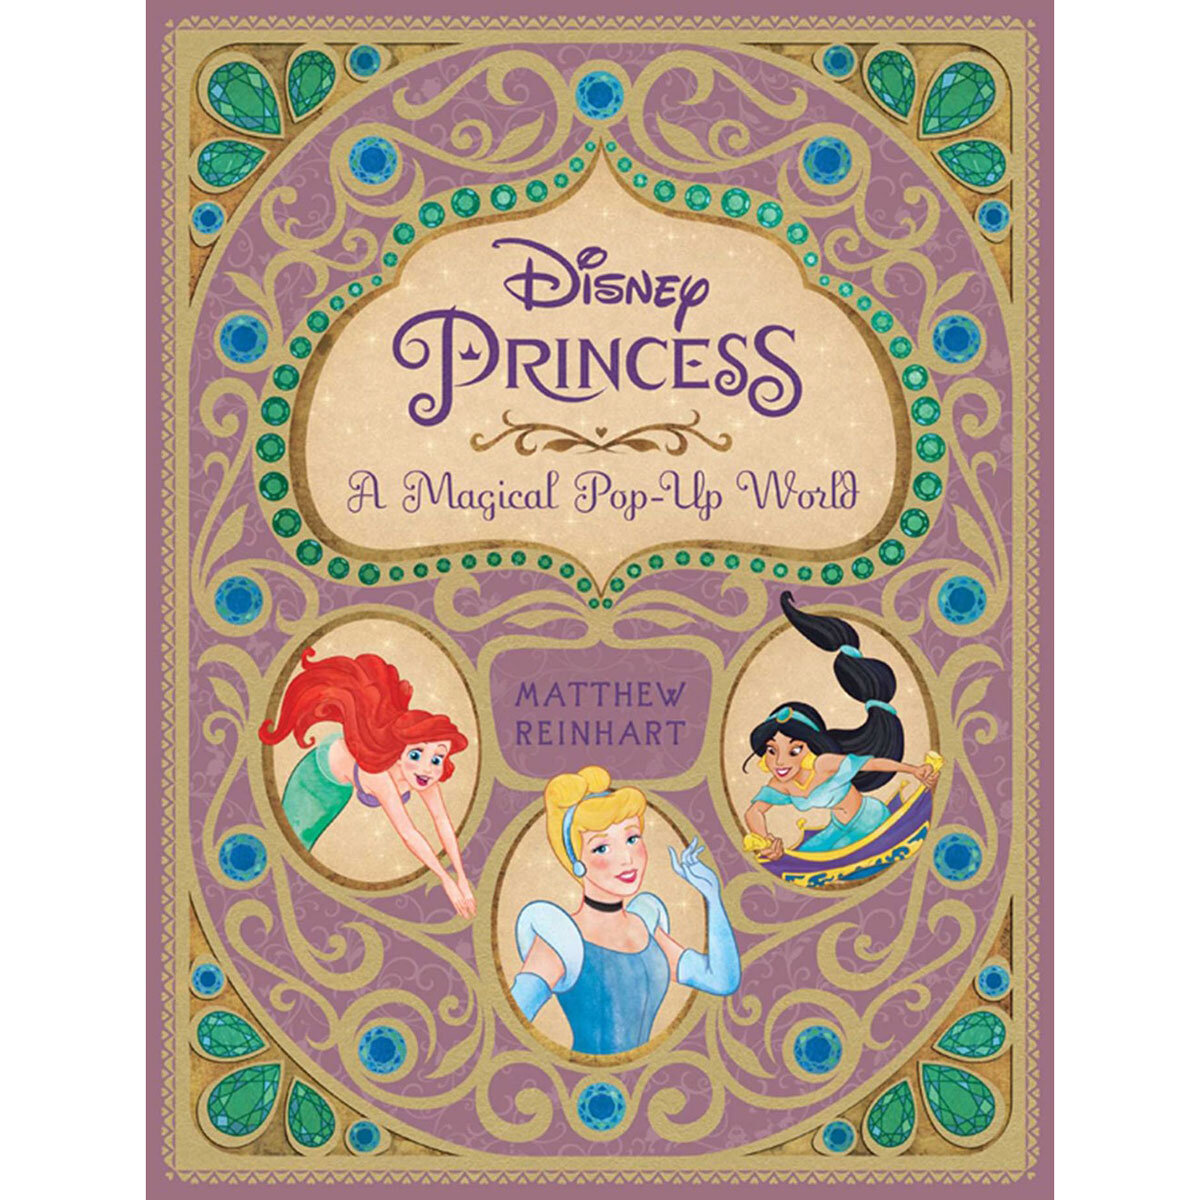 Front cover of Disney Princess pop up